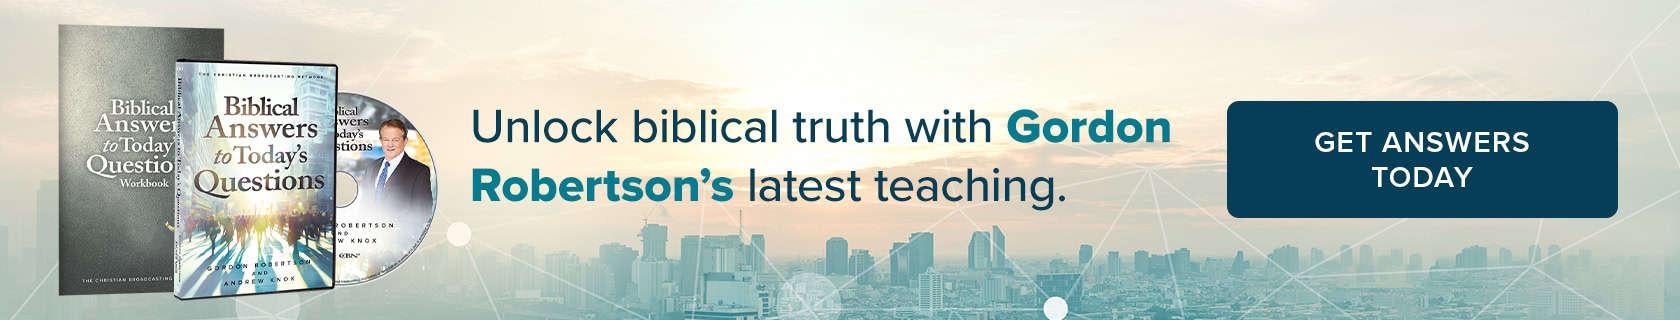 Unlock biblical truth with Gordon Robertson's latest teaching. Get Answers Today!